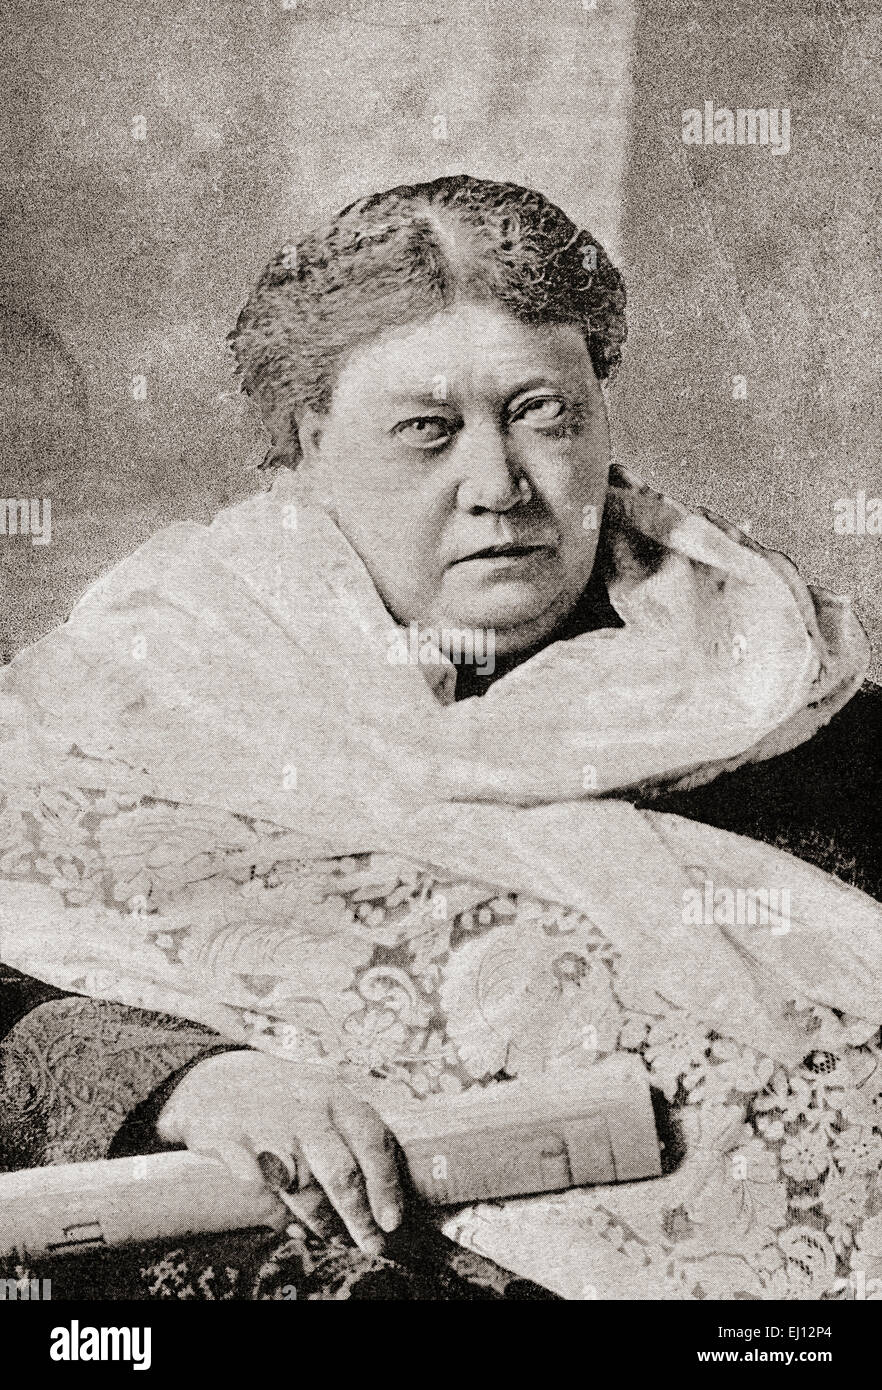 Helena Petrovna Blavatsky, 1831 –1891. Russian occultist, spirit medium, and author who co-founded the Theosophical Society in 1875. Stock Photo